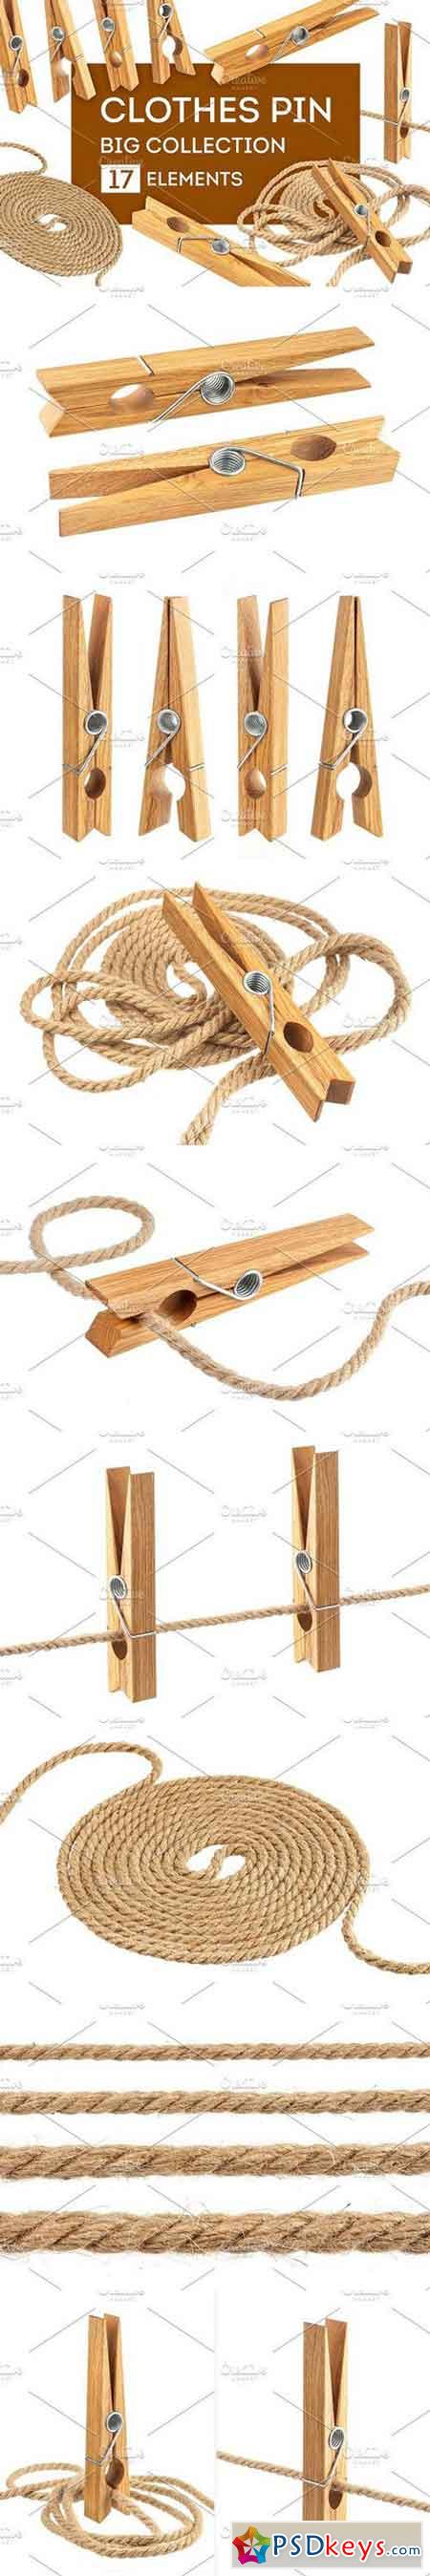 Clothes pin and rope 1331394